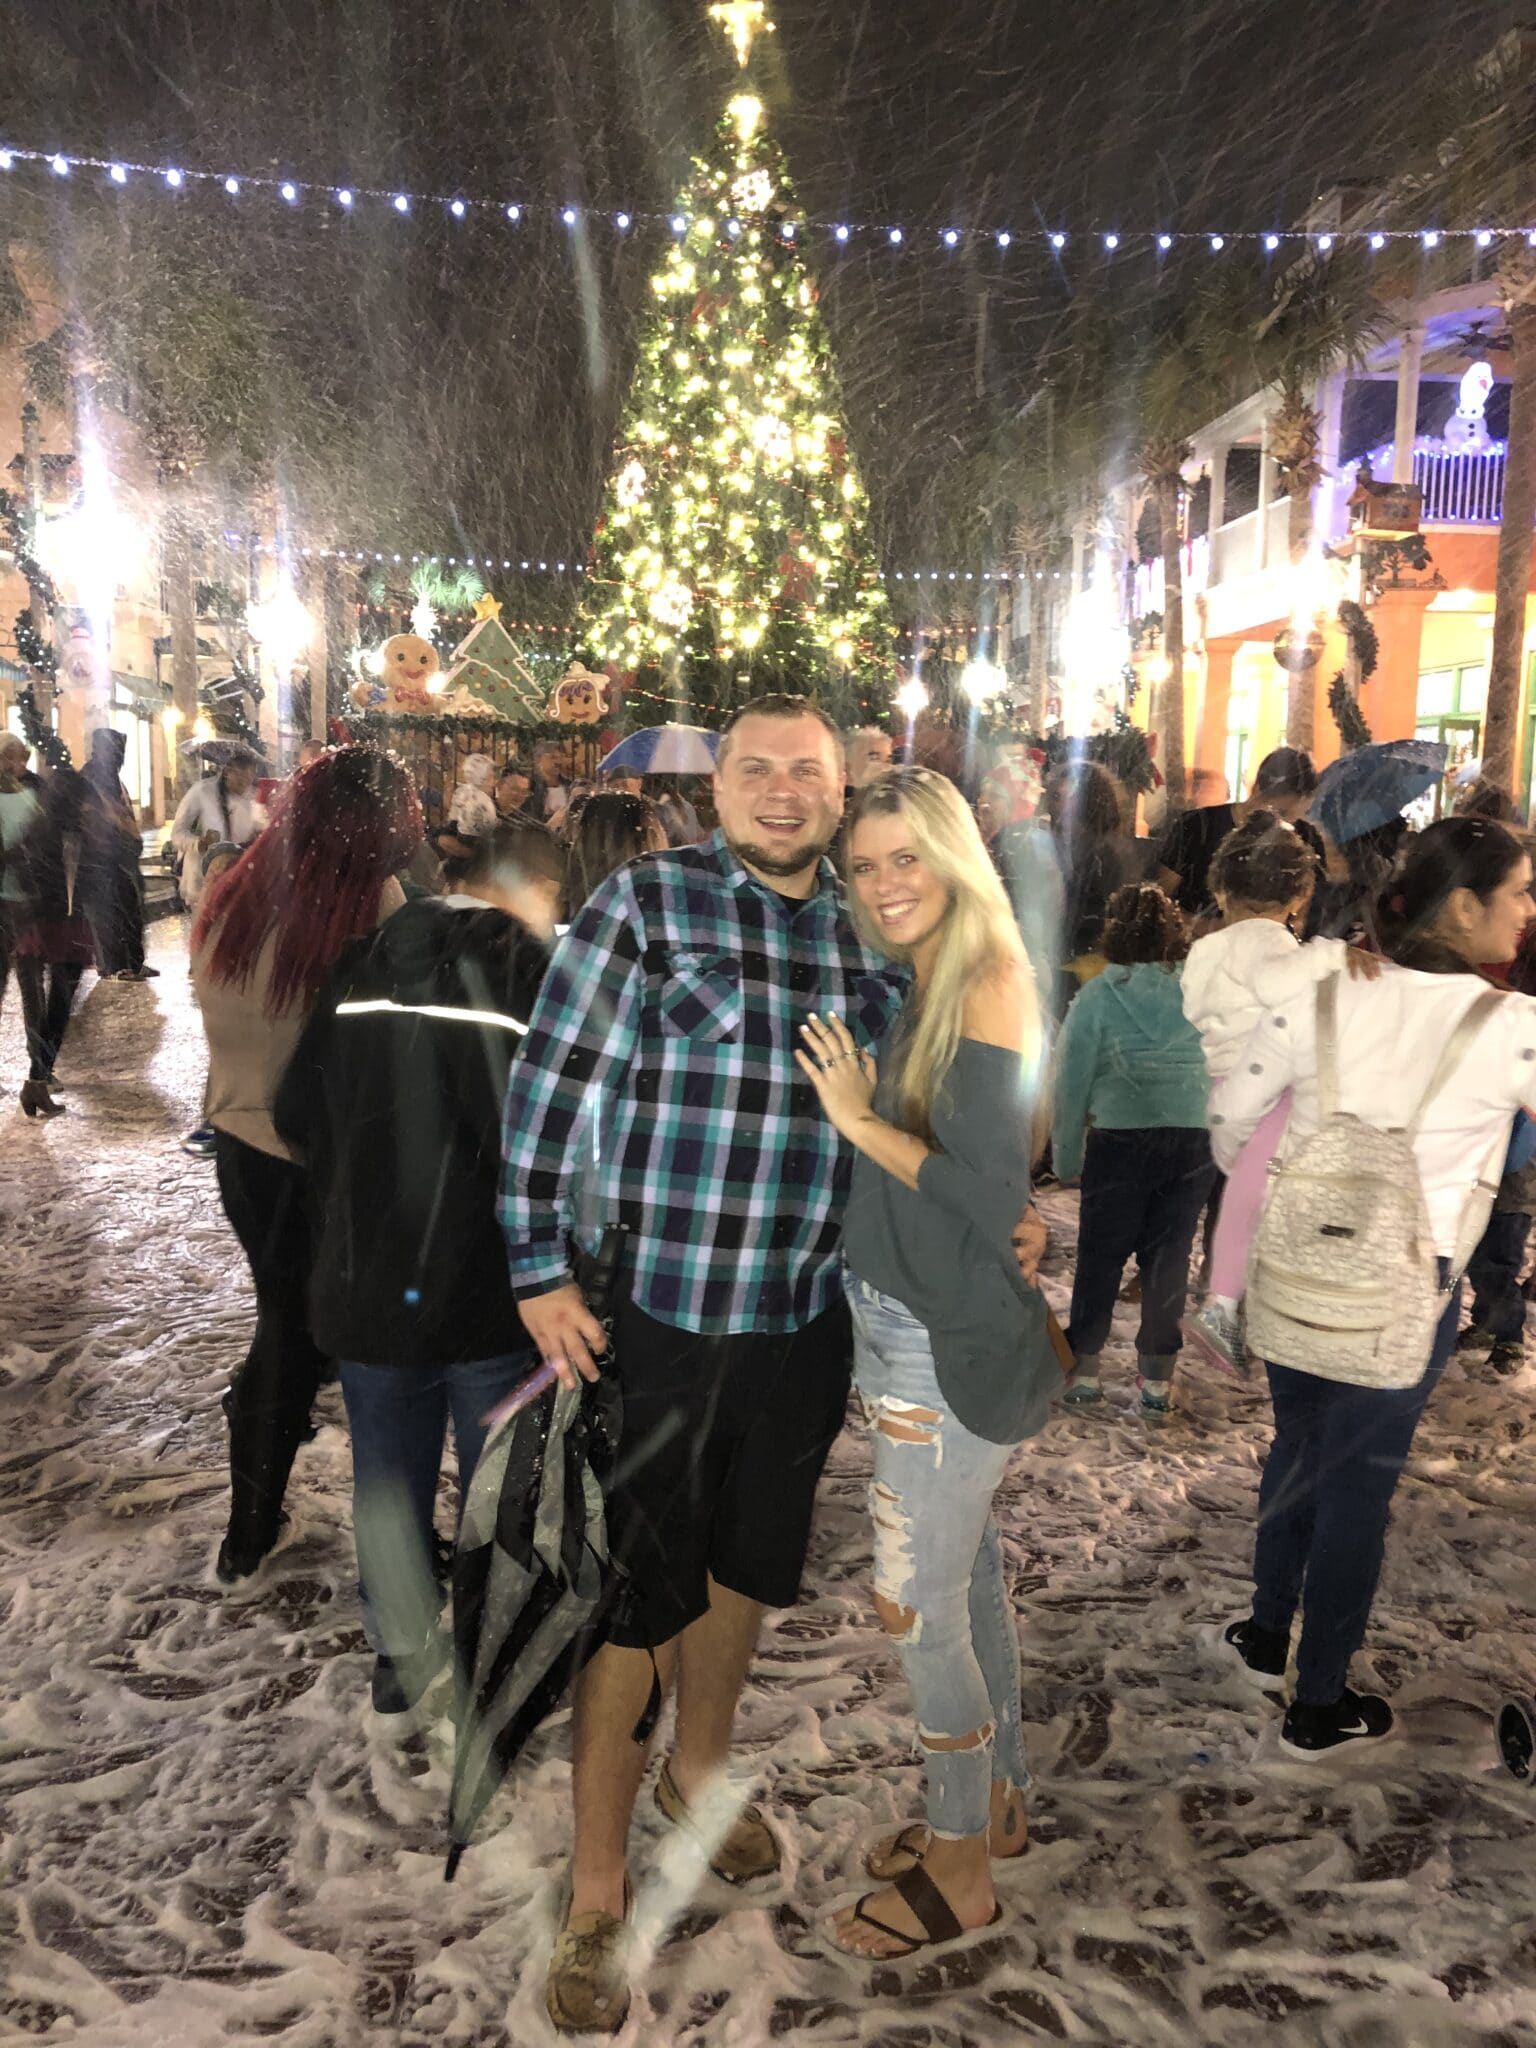 couple standing together in front of a large christmas tree with people surrounding them